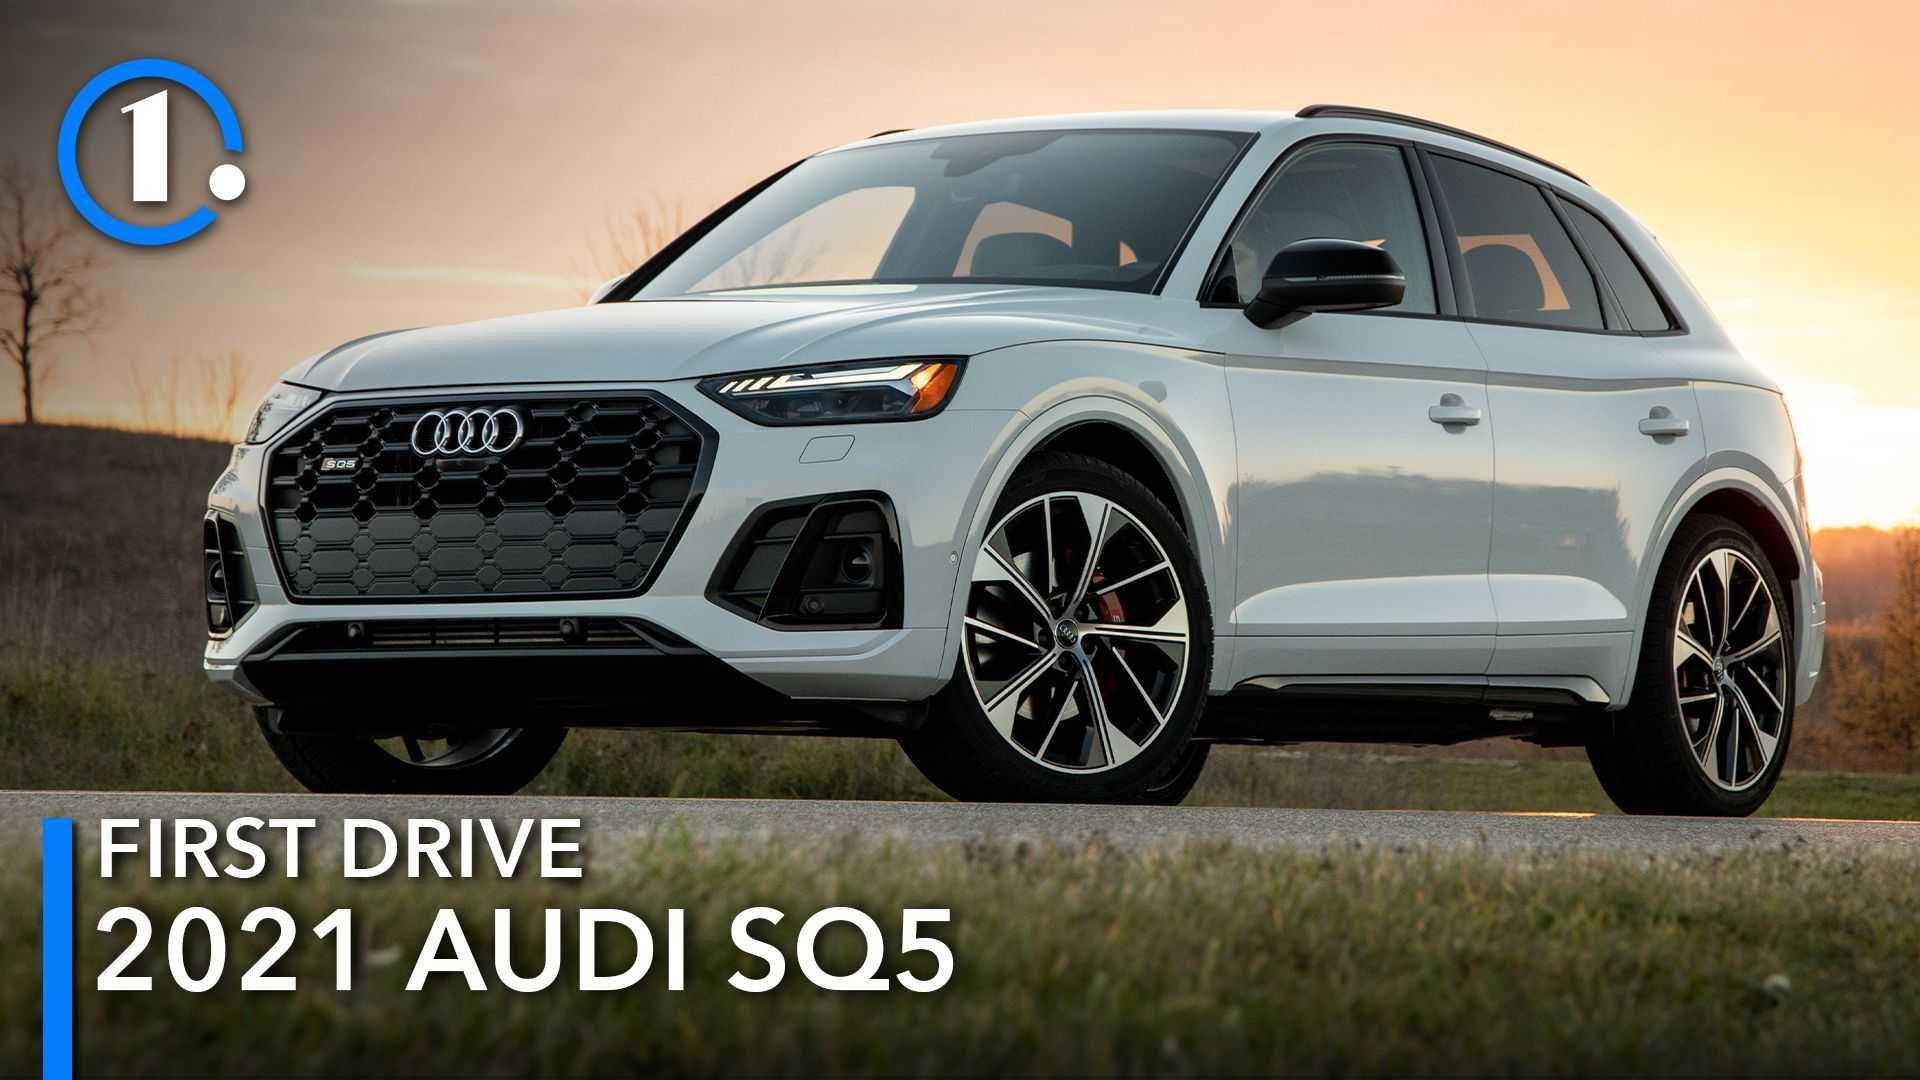 2021 Audi SQ5 First Drive Review: Just Right